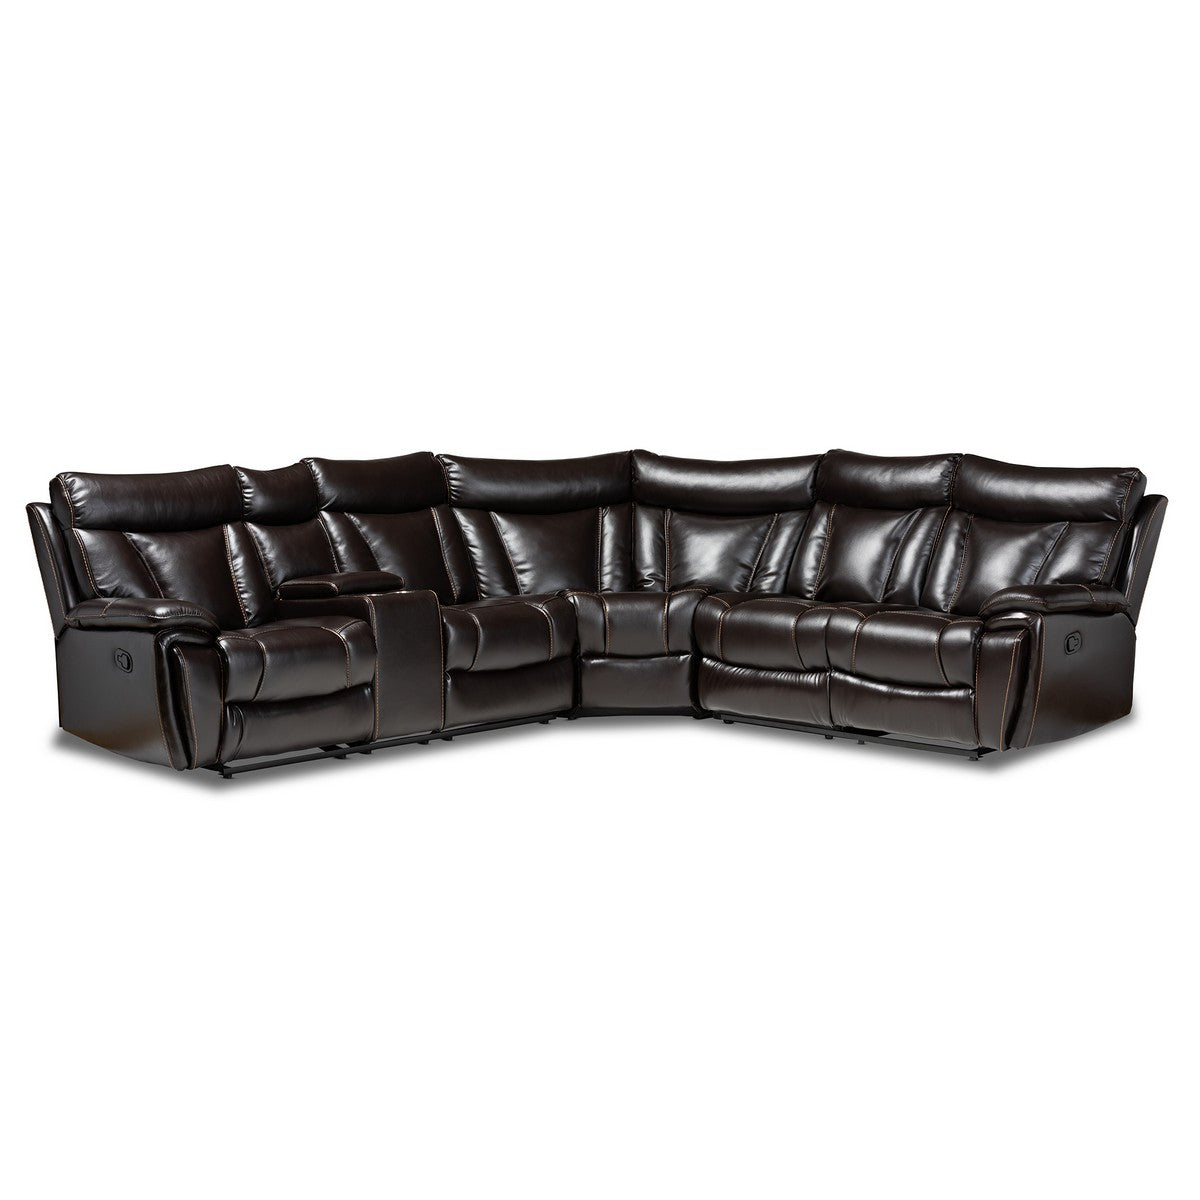 Baxton Studio Lewis Modern and Contemporary Dark Brown Faux Leather Upholstered 6-Piece Reclining Sectional Sofa Baxton Studio-sectionals-Minimal And Modern - 1